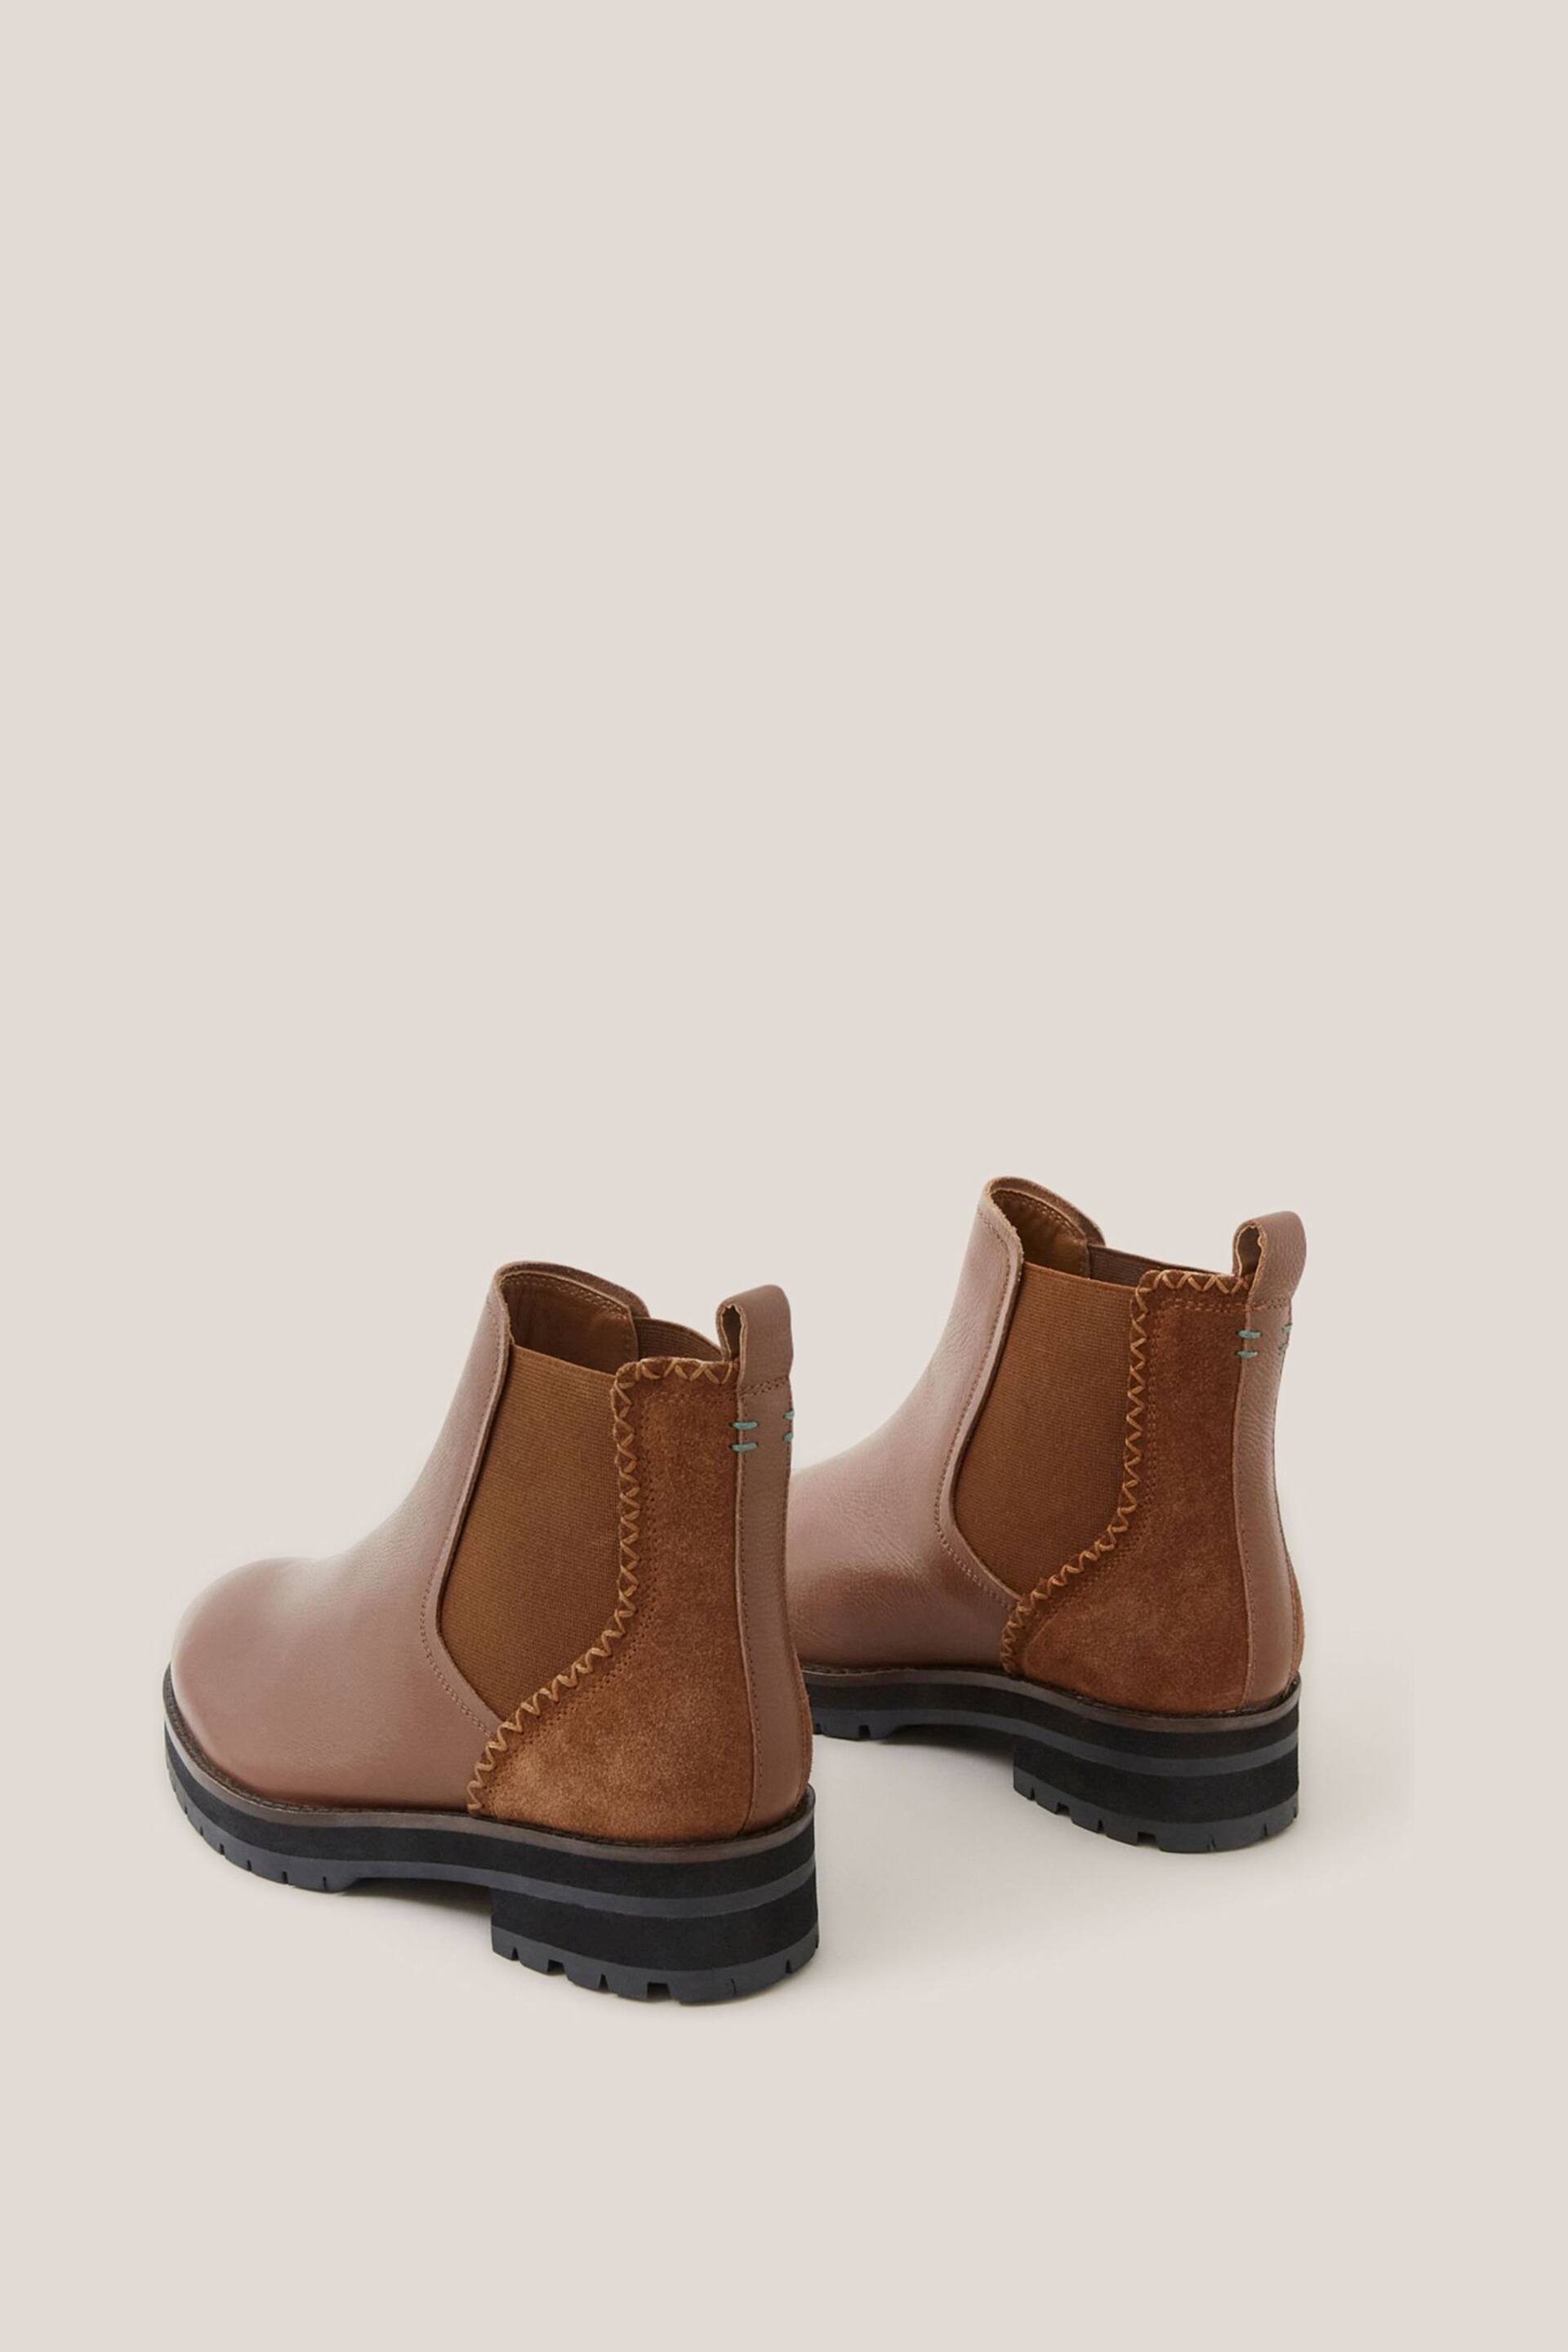 White Stuff Brown Wide Fit Leather Chelsea Boots - Image 3 of 4